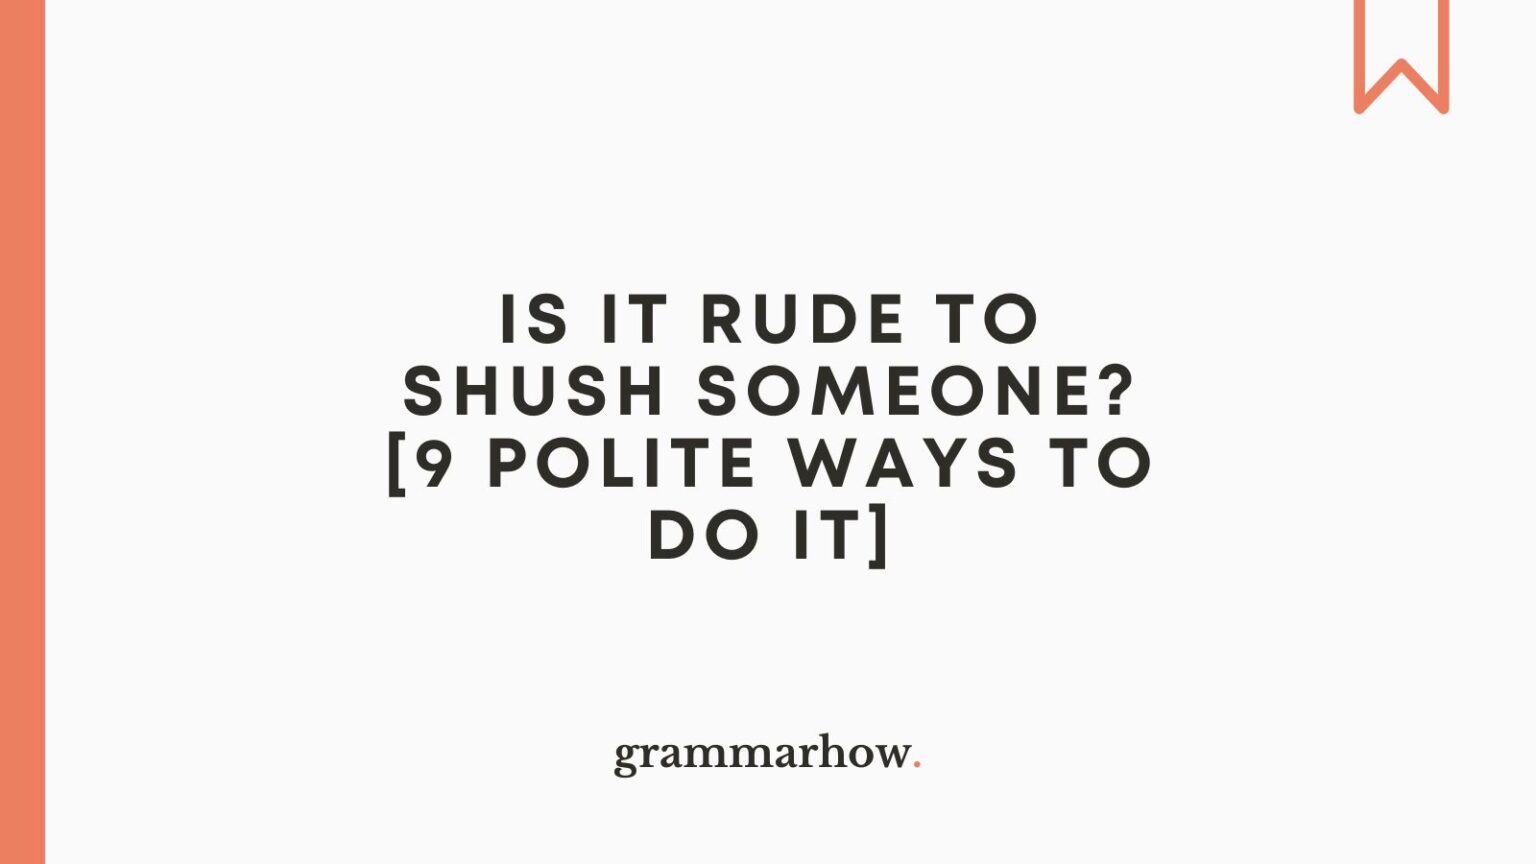 is-it-rude-to-shush-someone-9-polite-ways-to-do-it